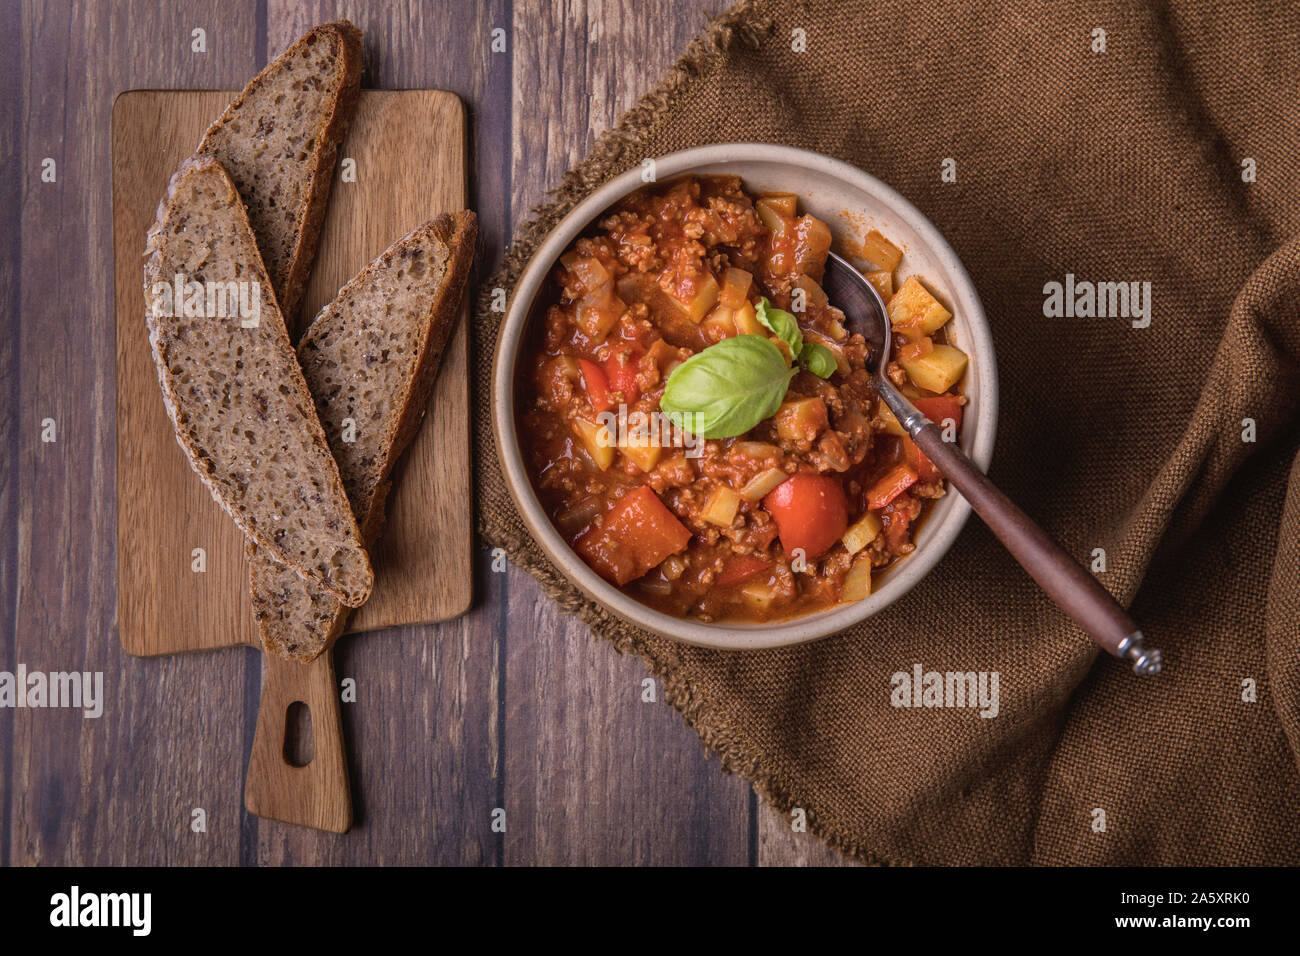 Thick soup or broth with minced meat, potatoes, tomatoes and red bell peppers. Next to the soup are some slices of homemade sourdough bread and fresh Stock Photo